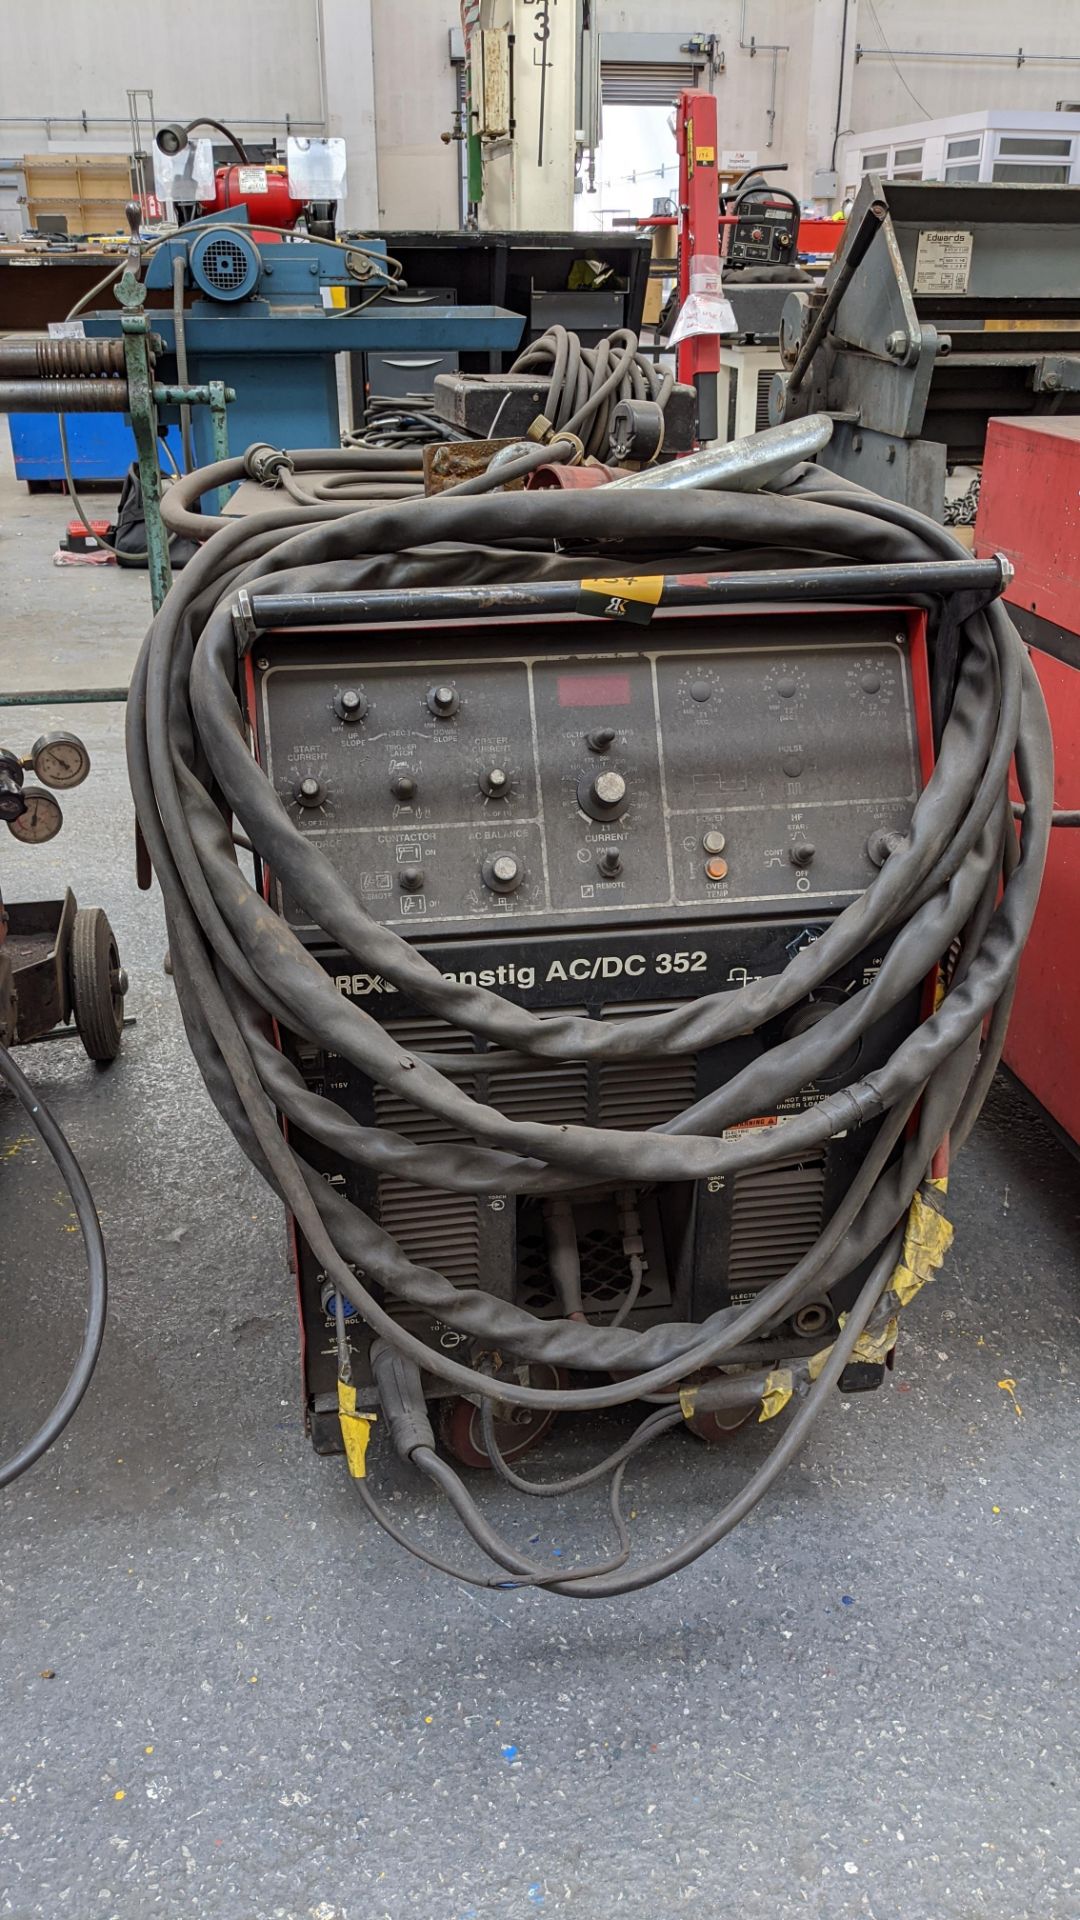 Murex Transtig AC/DC 352 welder includes power feed located at the back - Image 4 of 6